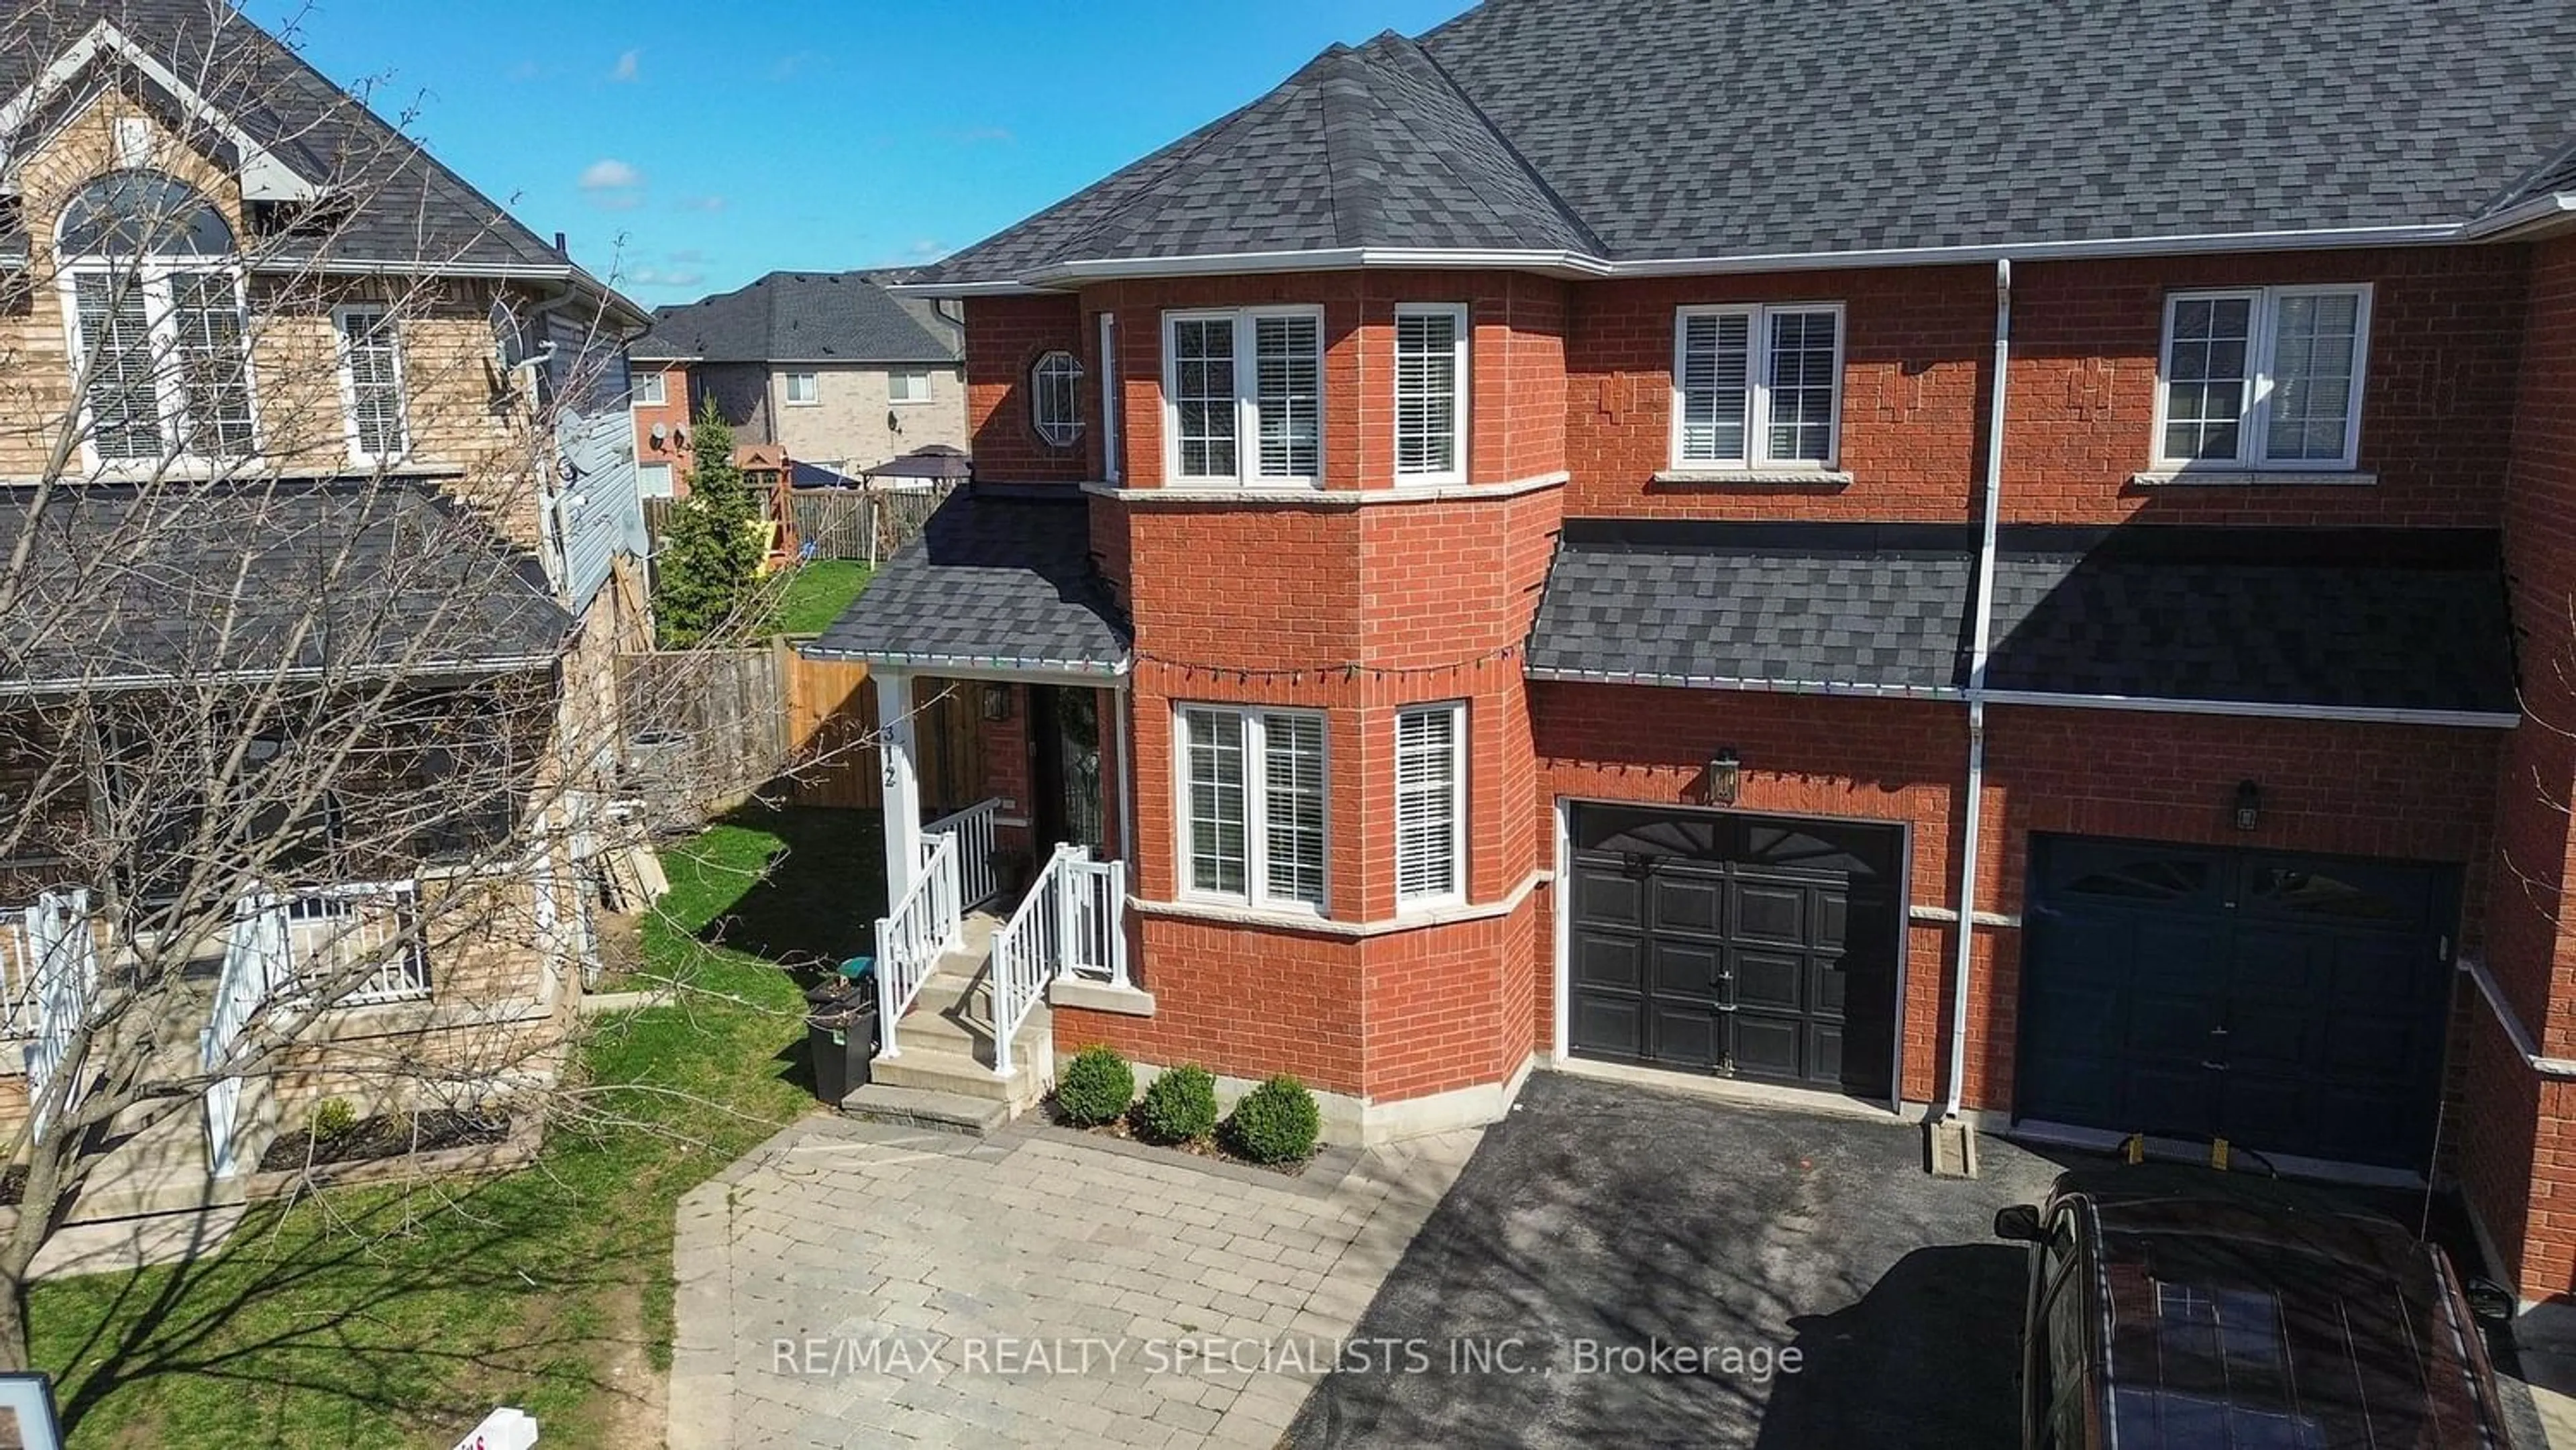 Home with brick exterior material for 312 Fasken Crt, Milton Ontario L9T 6S9